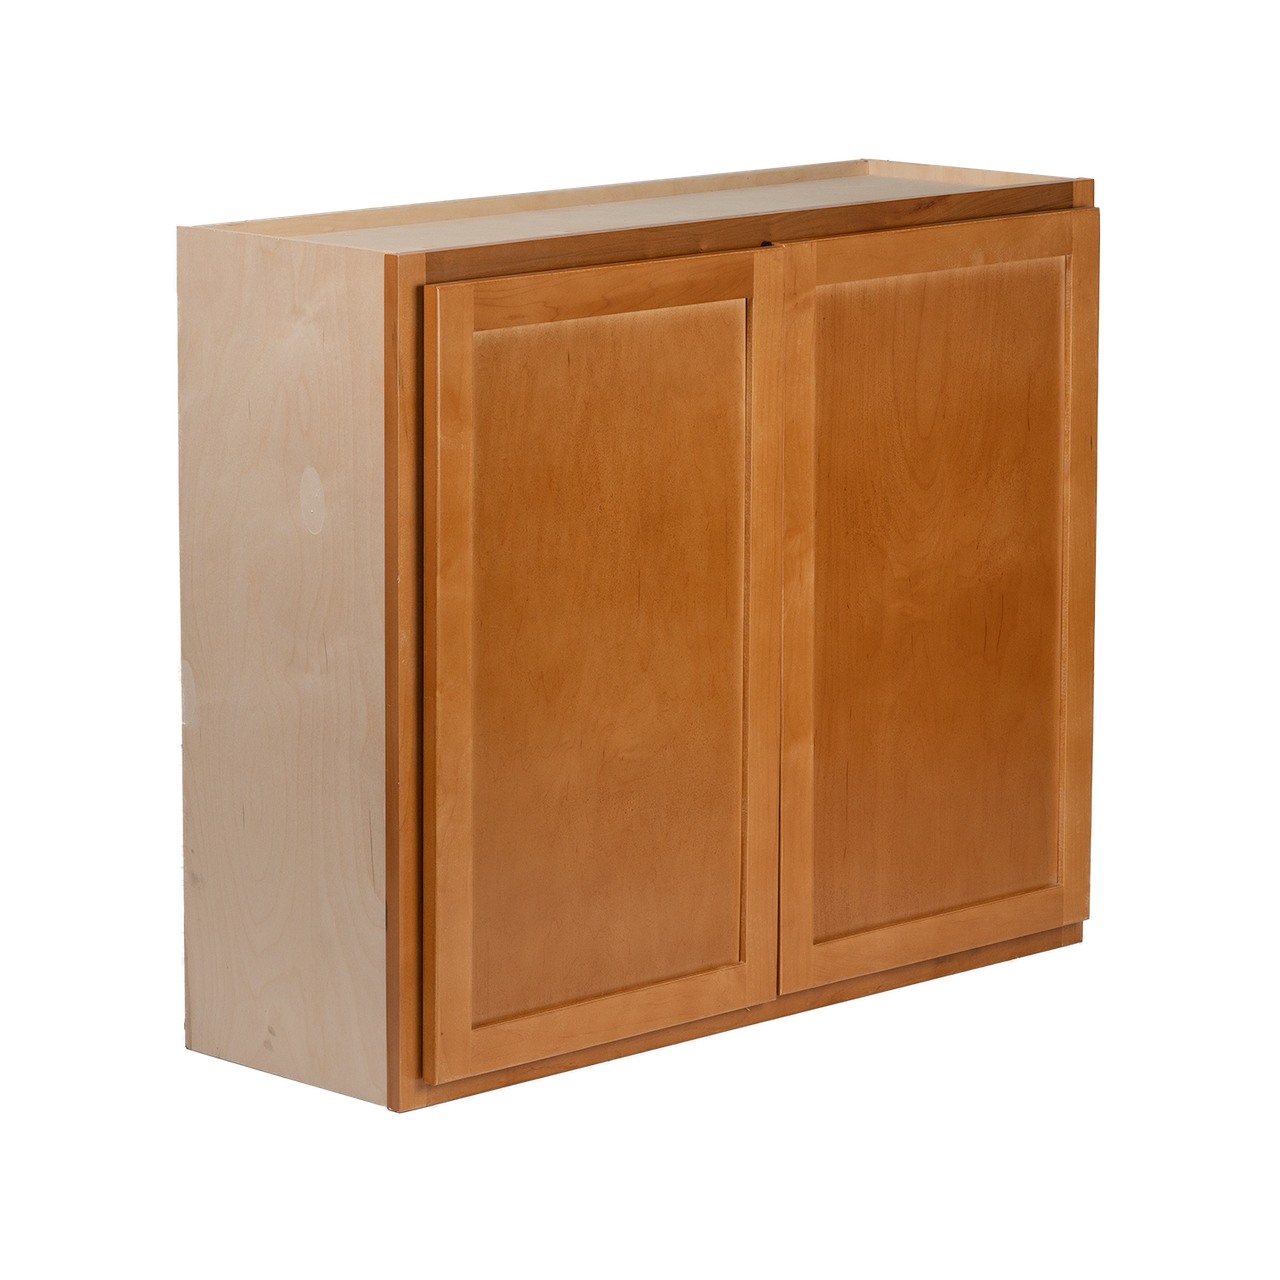 Quicklock RTA (Ready-to-Assemble) Provincial Stain Wall Cabinet- Large 36"H x (30", 36"W)